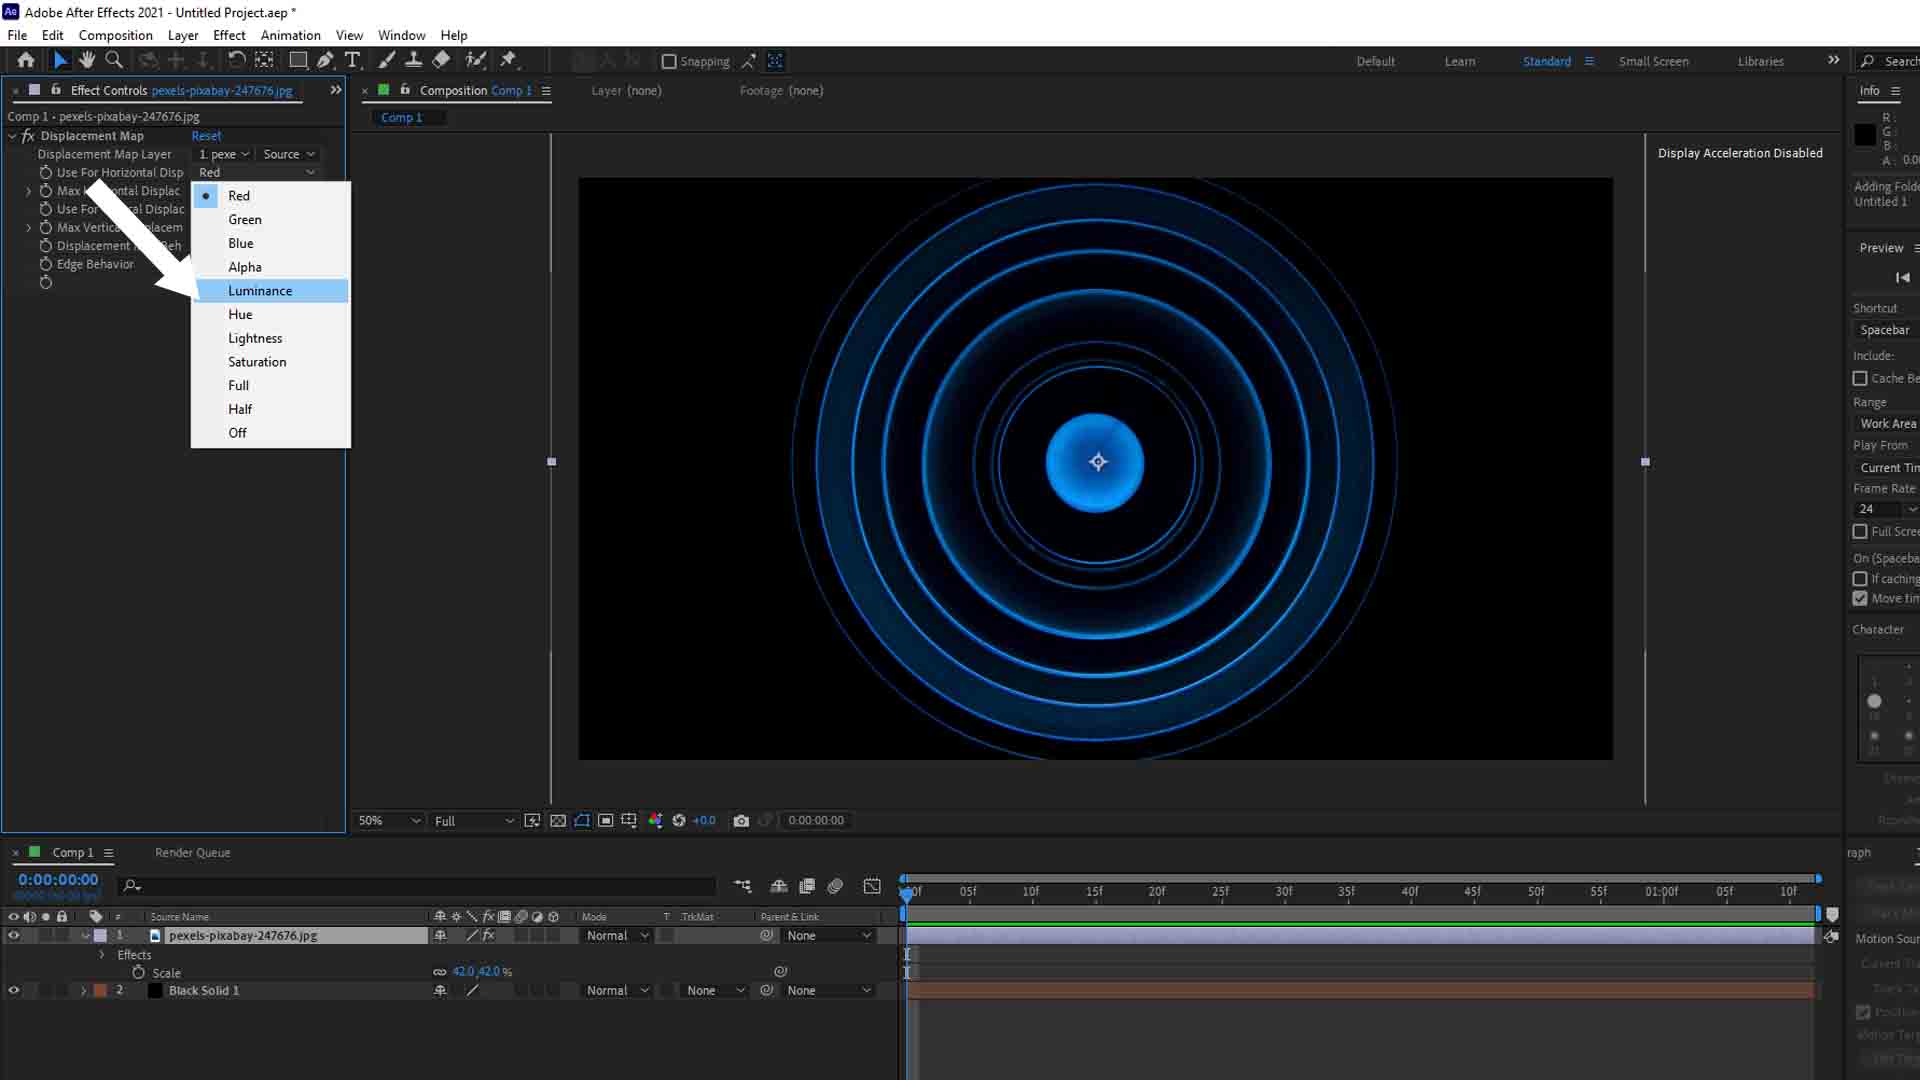 Displacement map in Adobe after effects